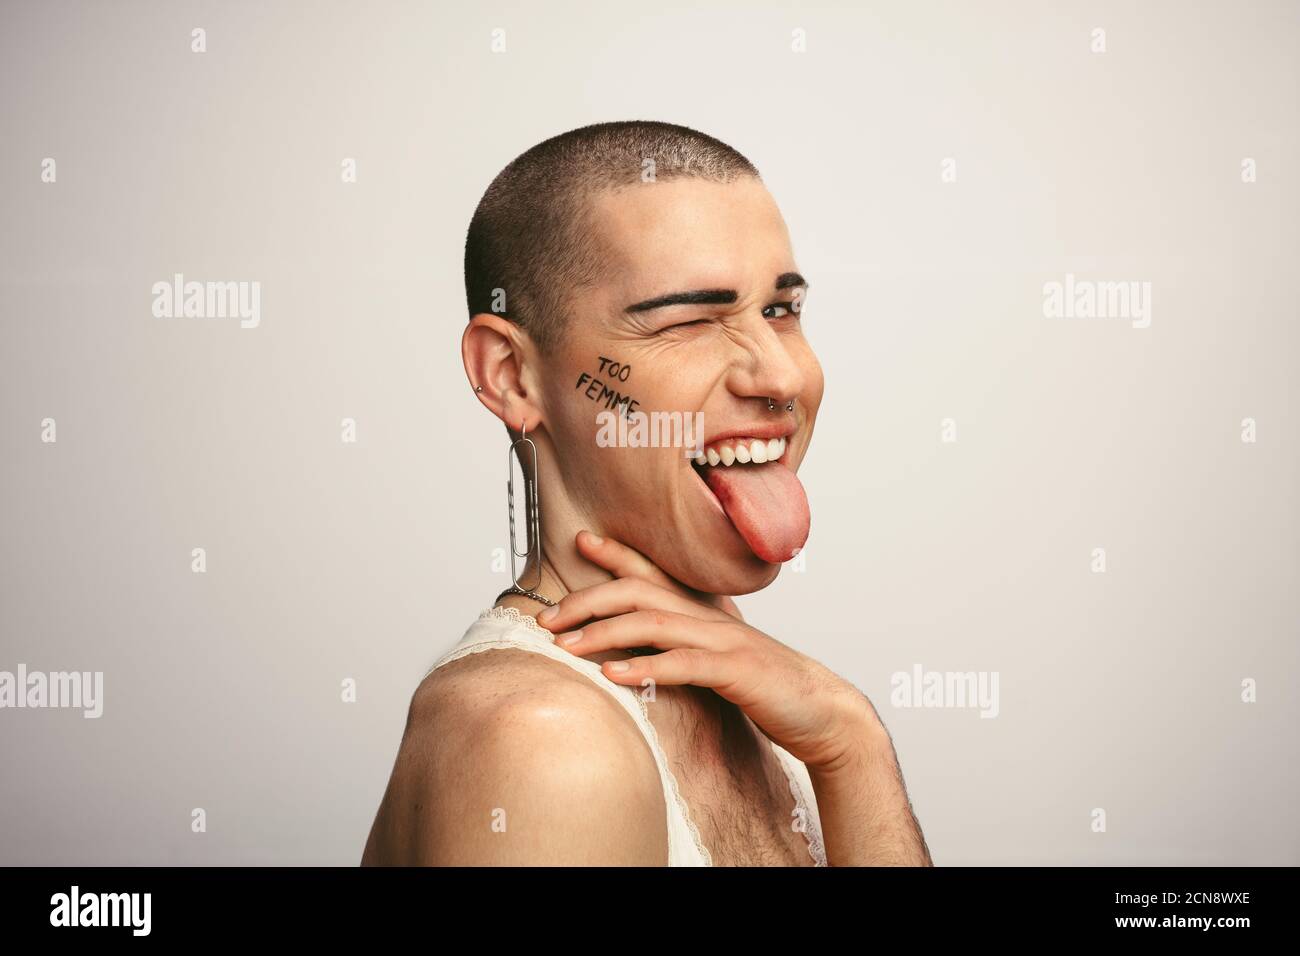 Gay man sticking out tongue and winking his eye. Gender fluid man making funny facial expressions on white background. Stock Photo